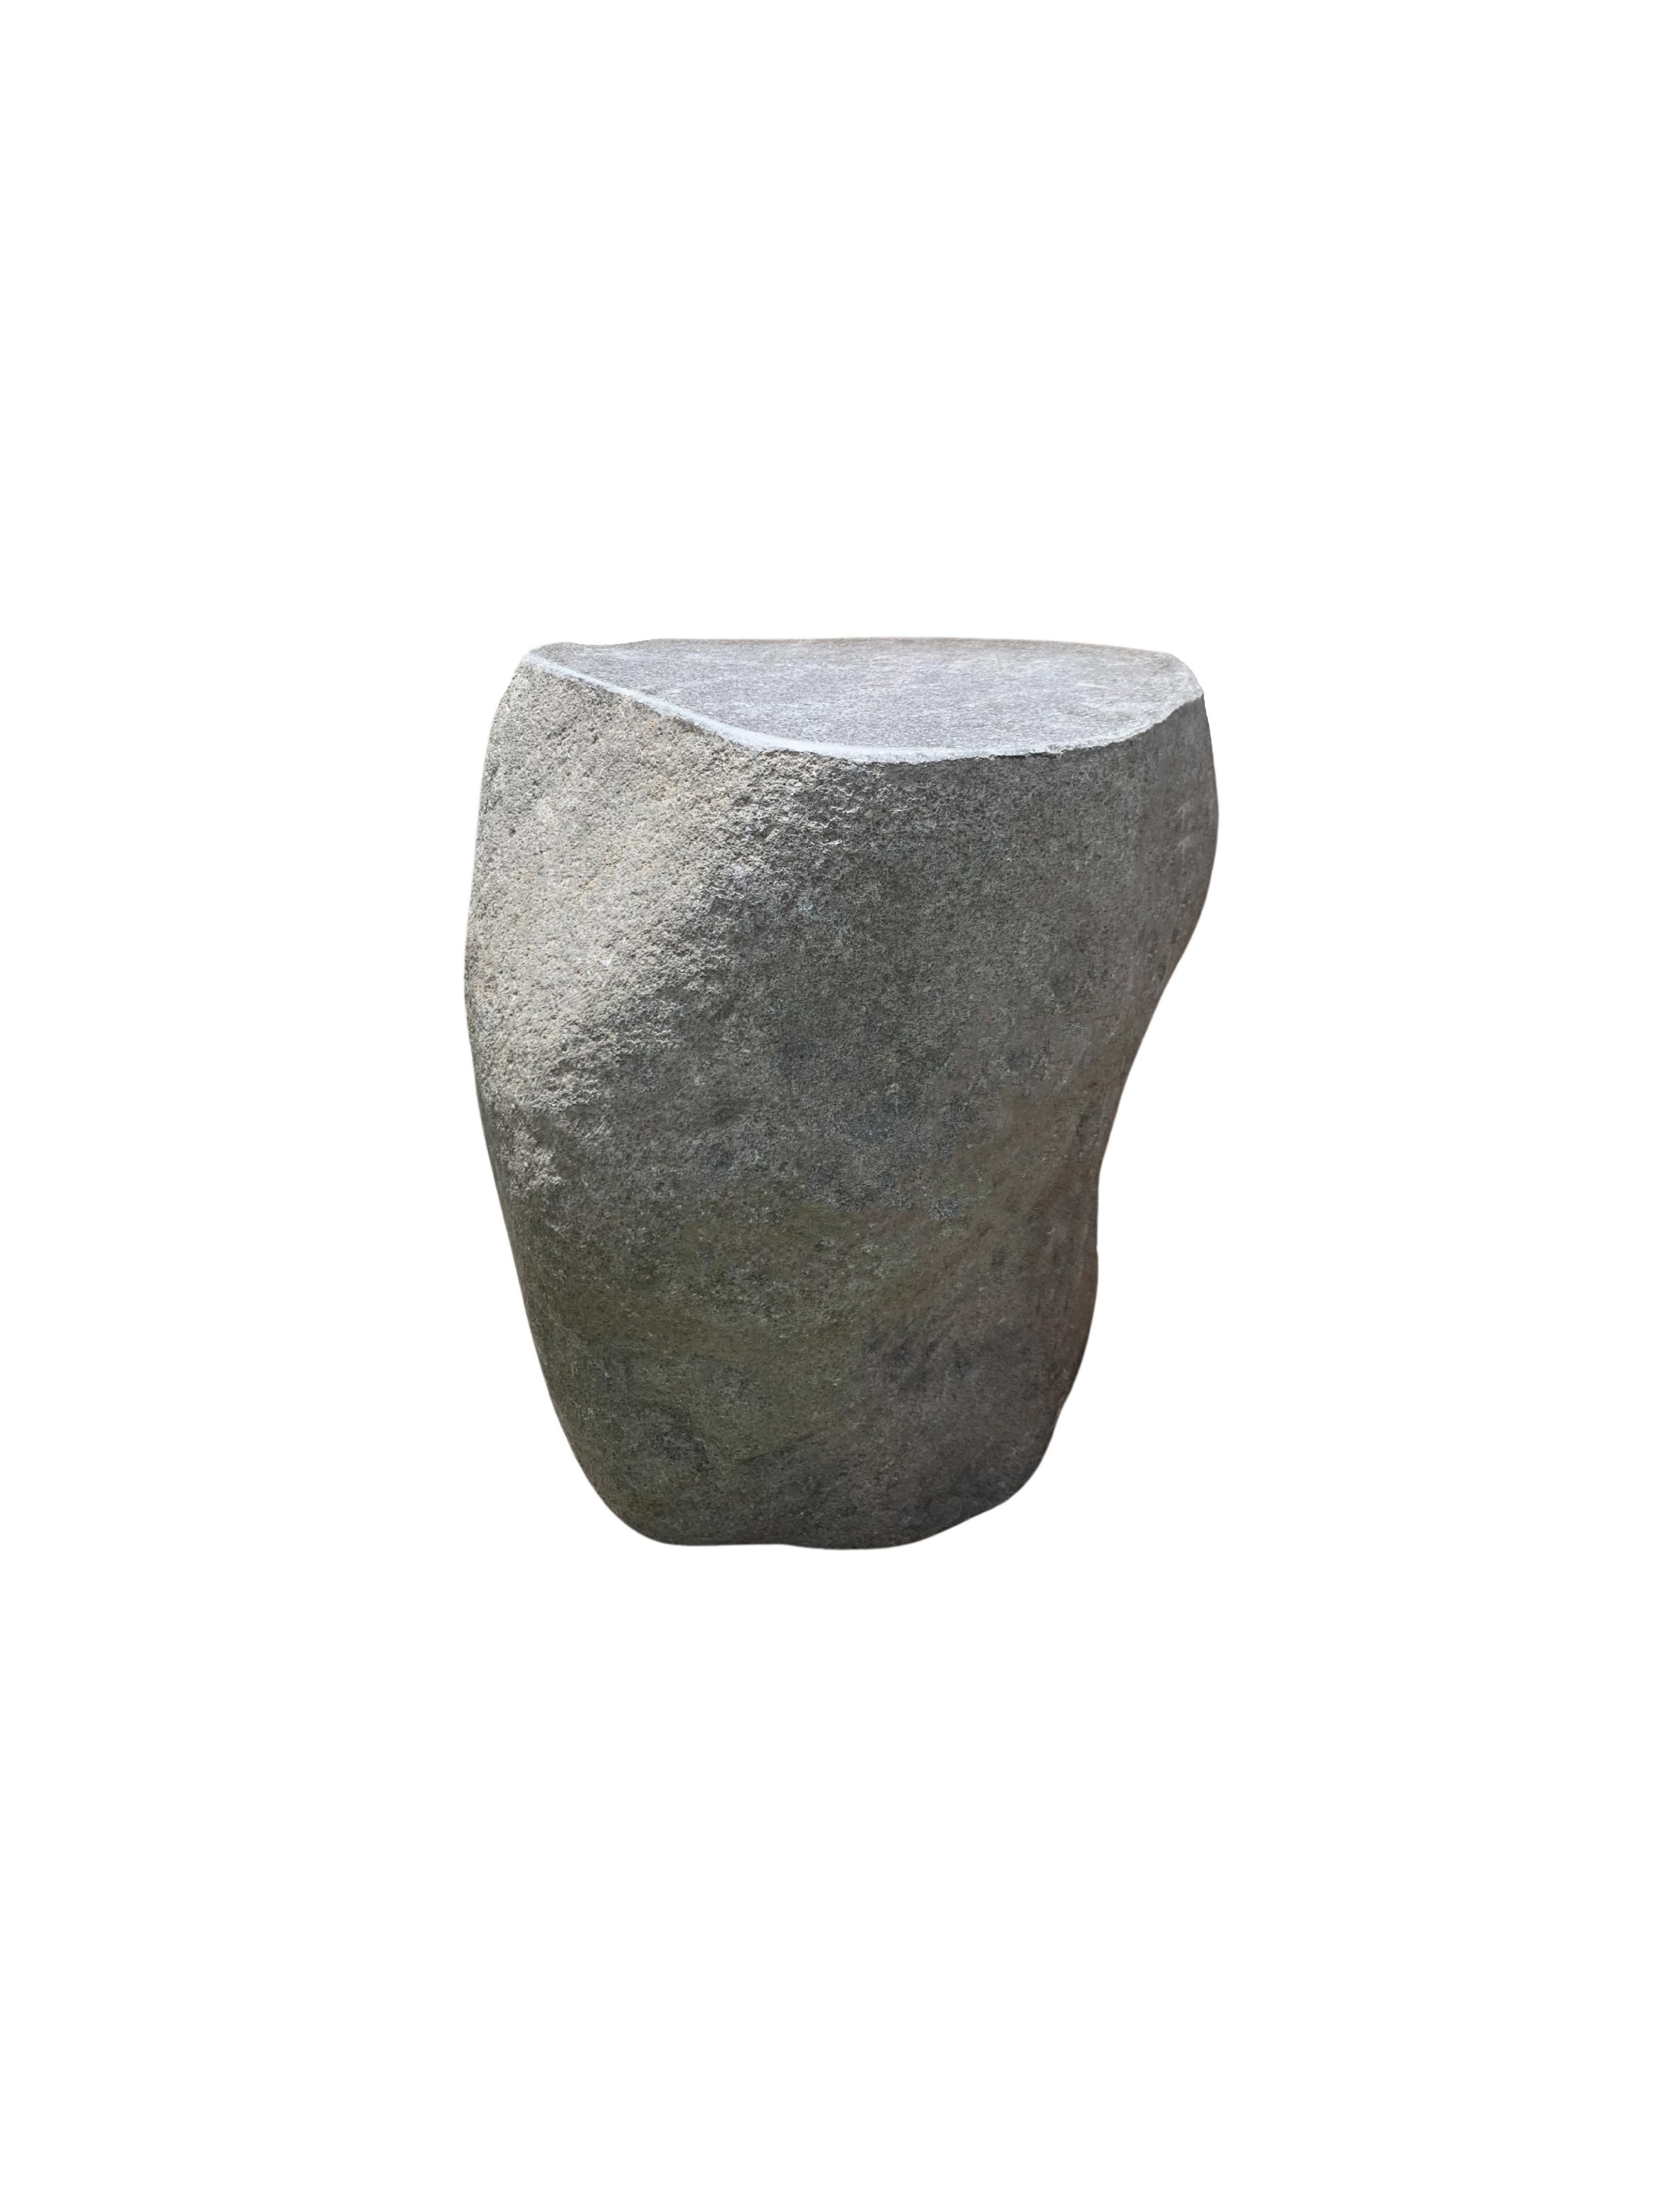 Hand-Crafted Solid Stone Side Table / Pedestal from Java, Indonesia